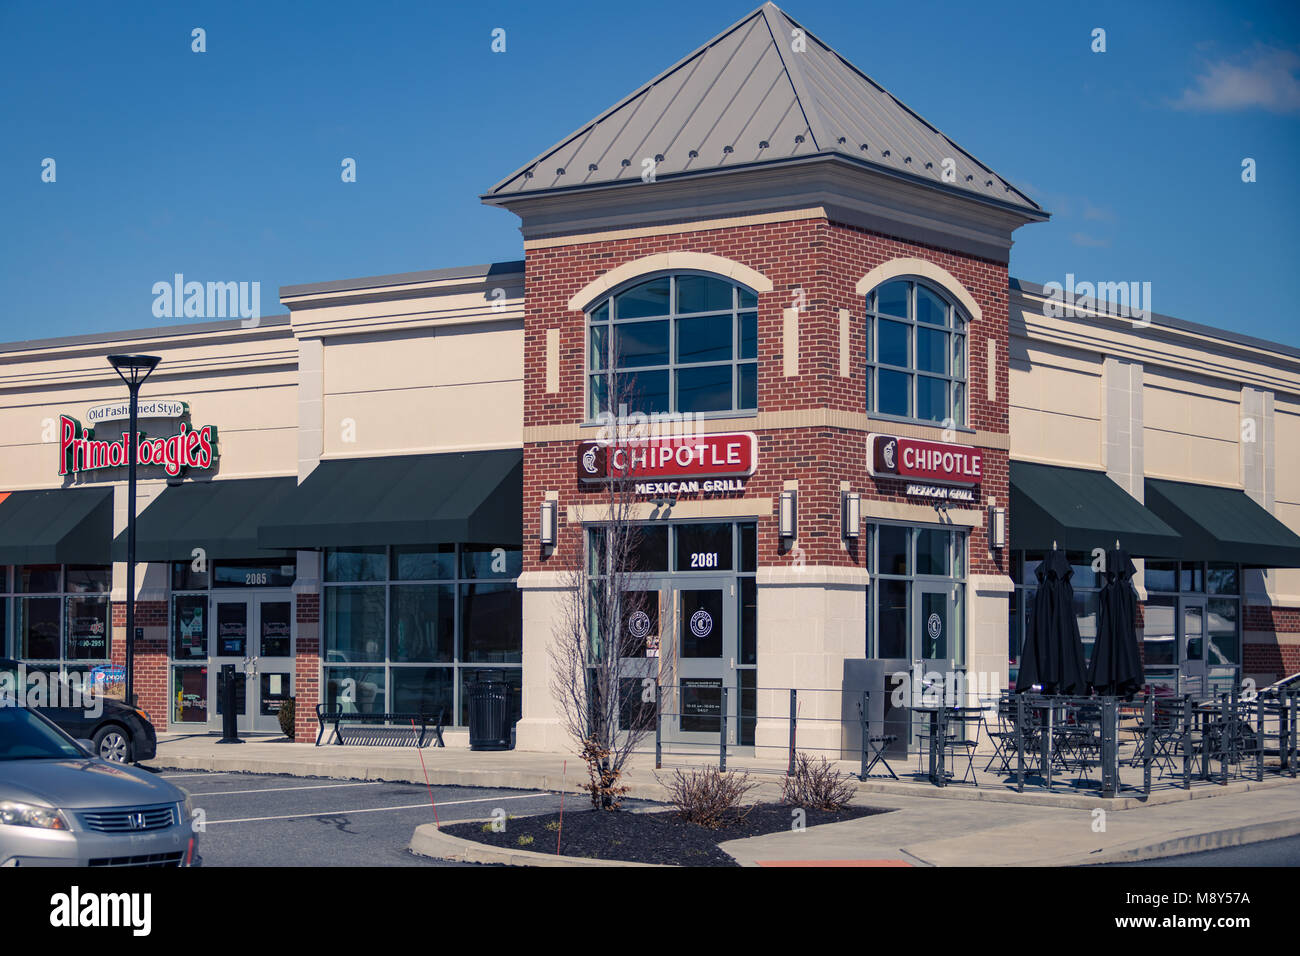 Lancaster, PA, USA - March 15, 2018: Exterior of Chipotle Mexican Grill restaurant, an American chain serving fast food in over 2000 locations. Stock Photo